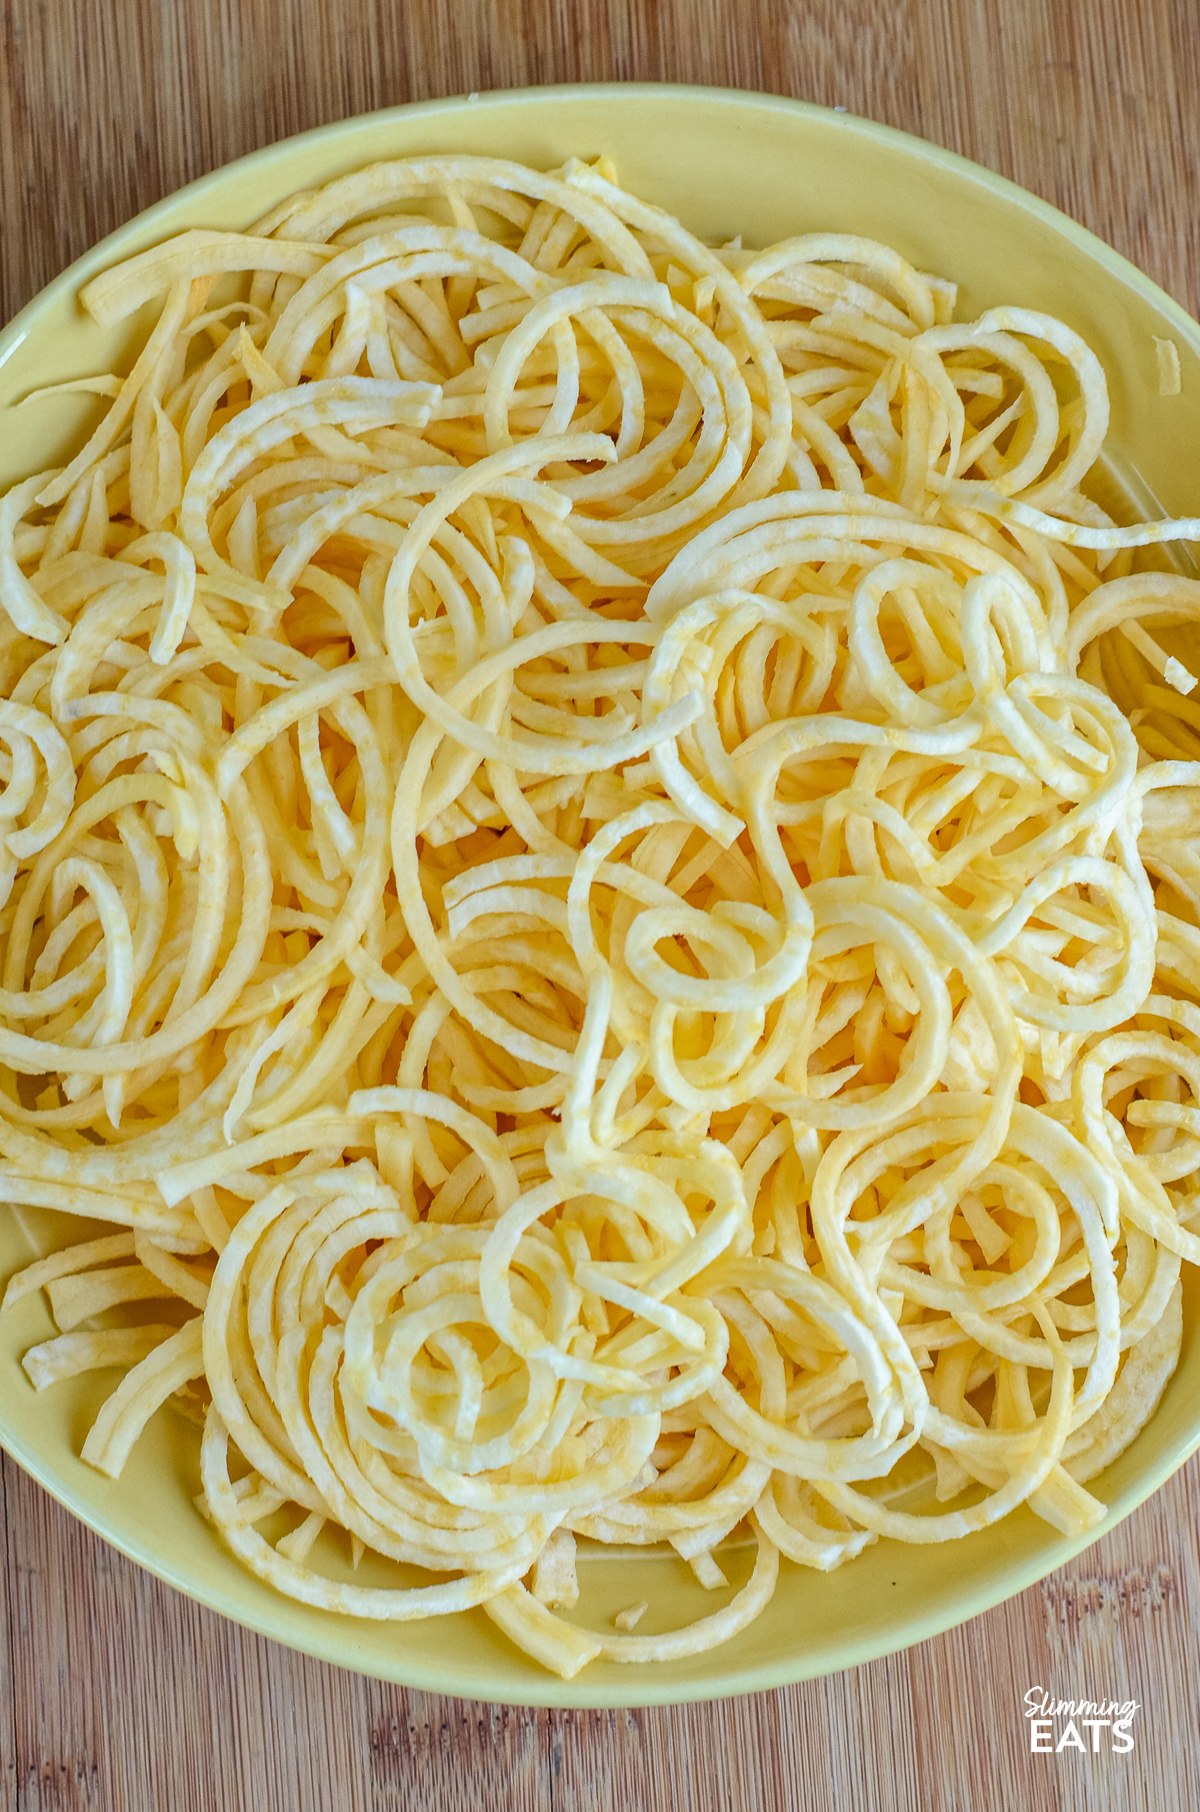 unseasoned spiralized swede fries in a yellow bowl